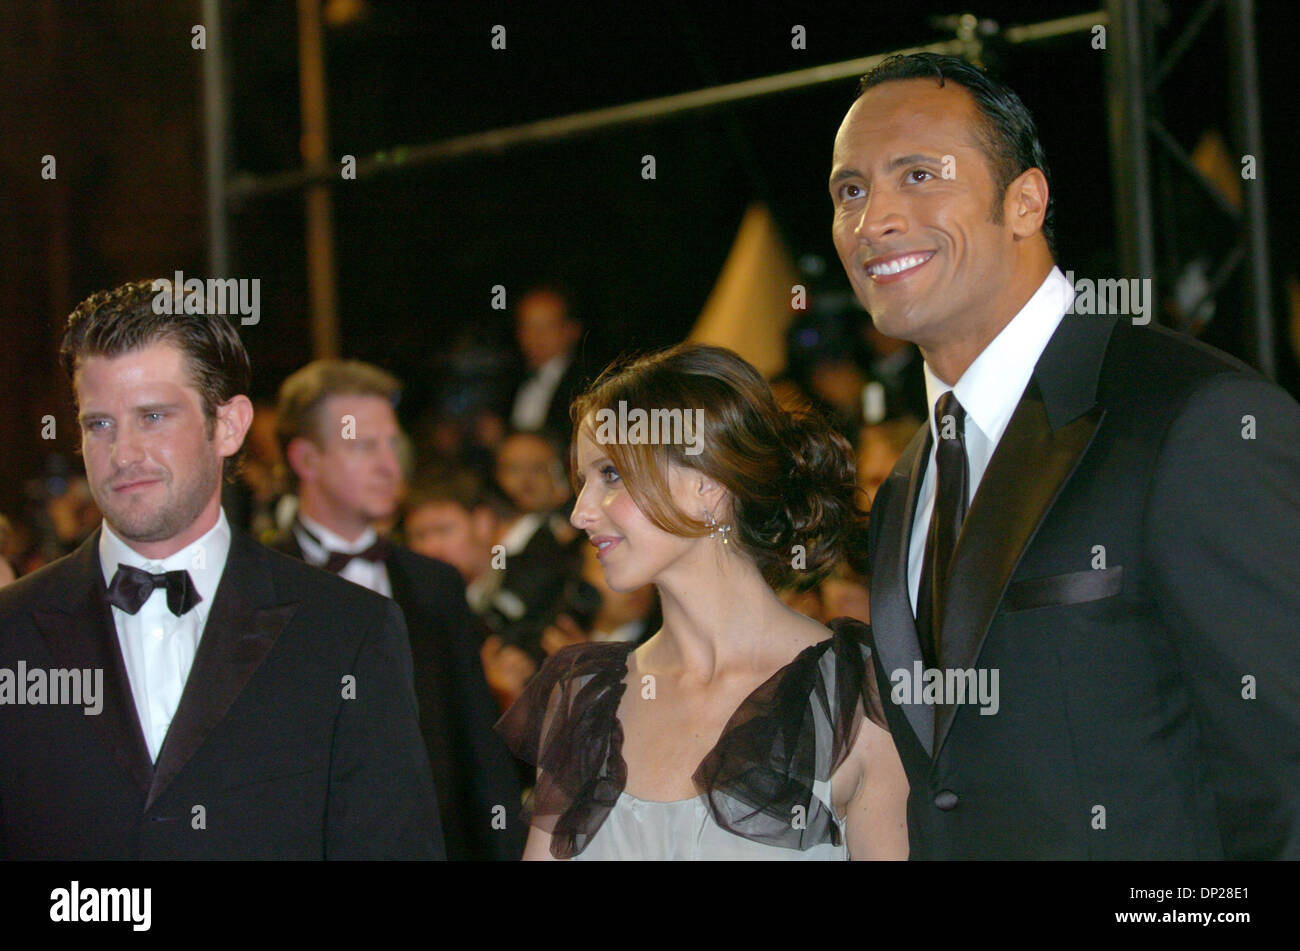 May 21, 2006; Cannes, FRANCE; Writer/director RICHARD KELLY with actors SARAH MICHELLE GELLAR and DWAYNE 'THE ROCK' JOHNSON at the 'Southland Tales' premiere at the 59th Cannes Film Festival. Mandatory Credit: Photo by Frederic Injimbert/ZUMA Press. (©) Copyright 2006 by Frederic Injimbert Stock Photo